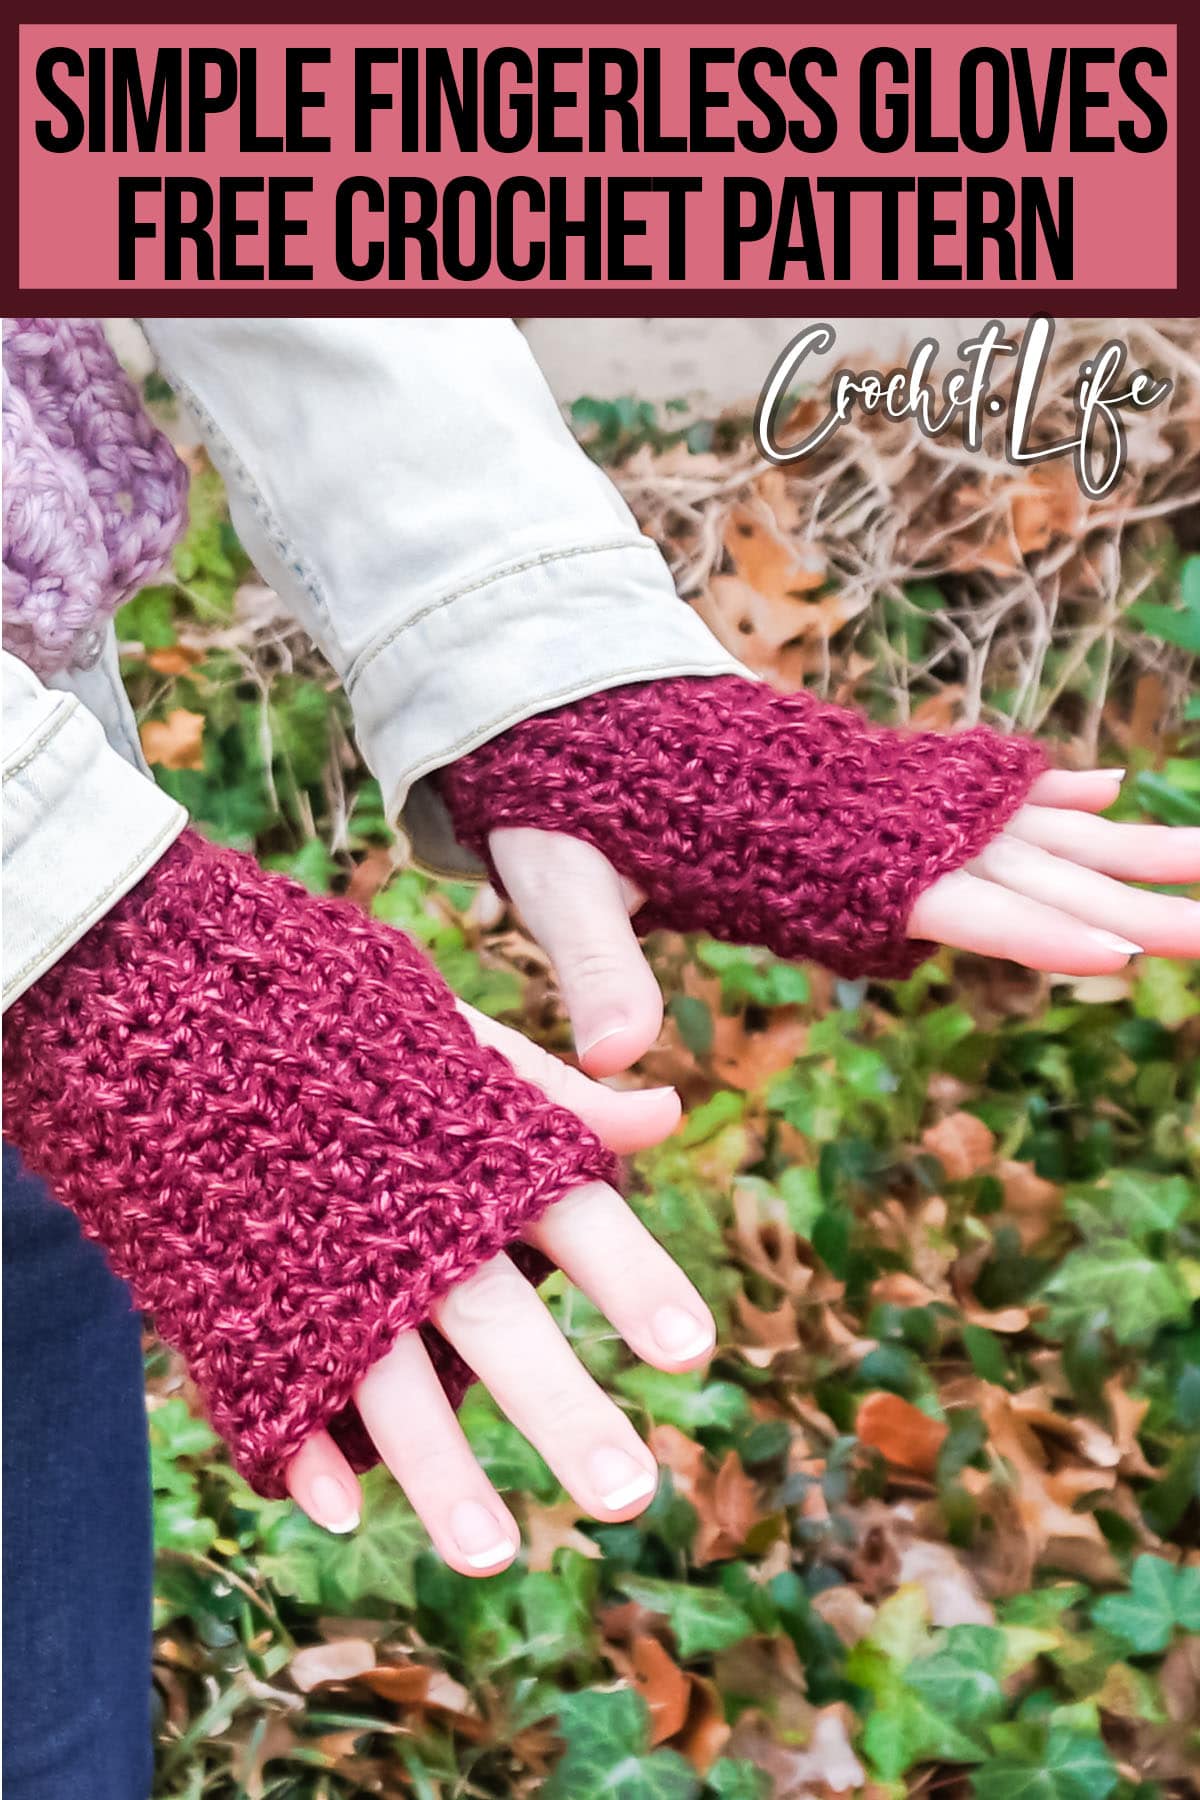 easy fingerless glove crochet pattern for free with text which reads simple fingerless gloves free crochet pattern 